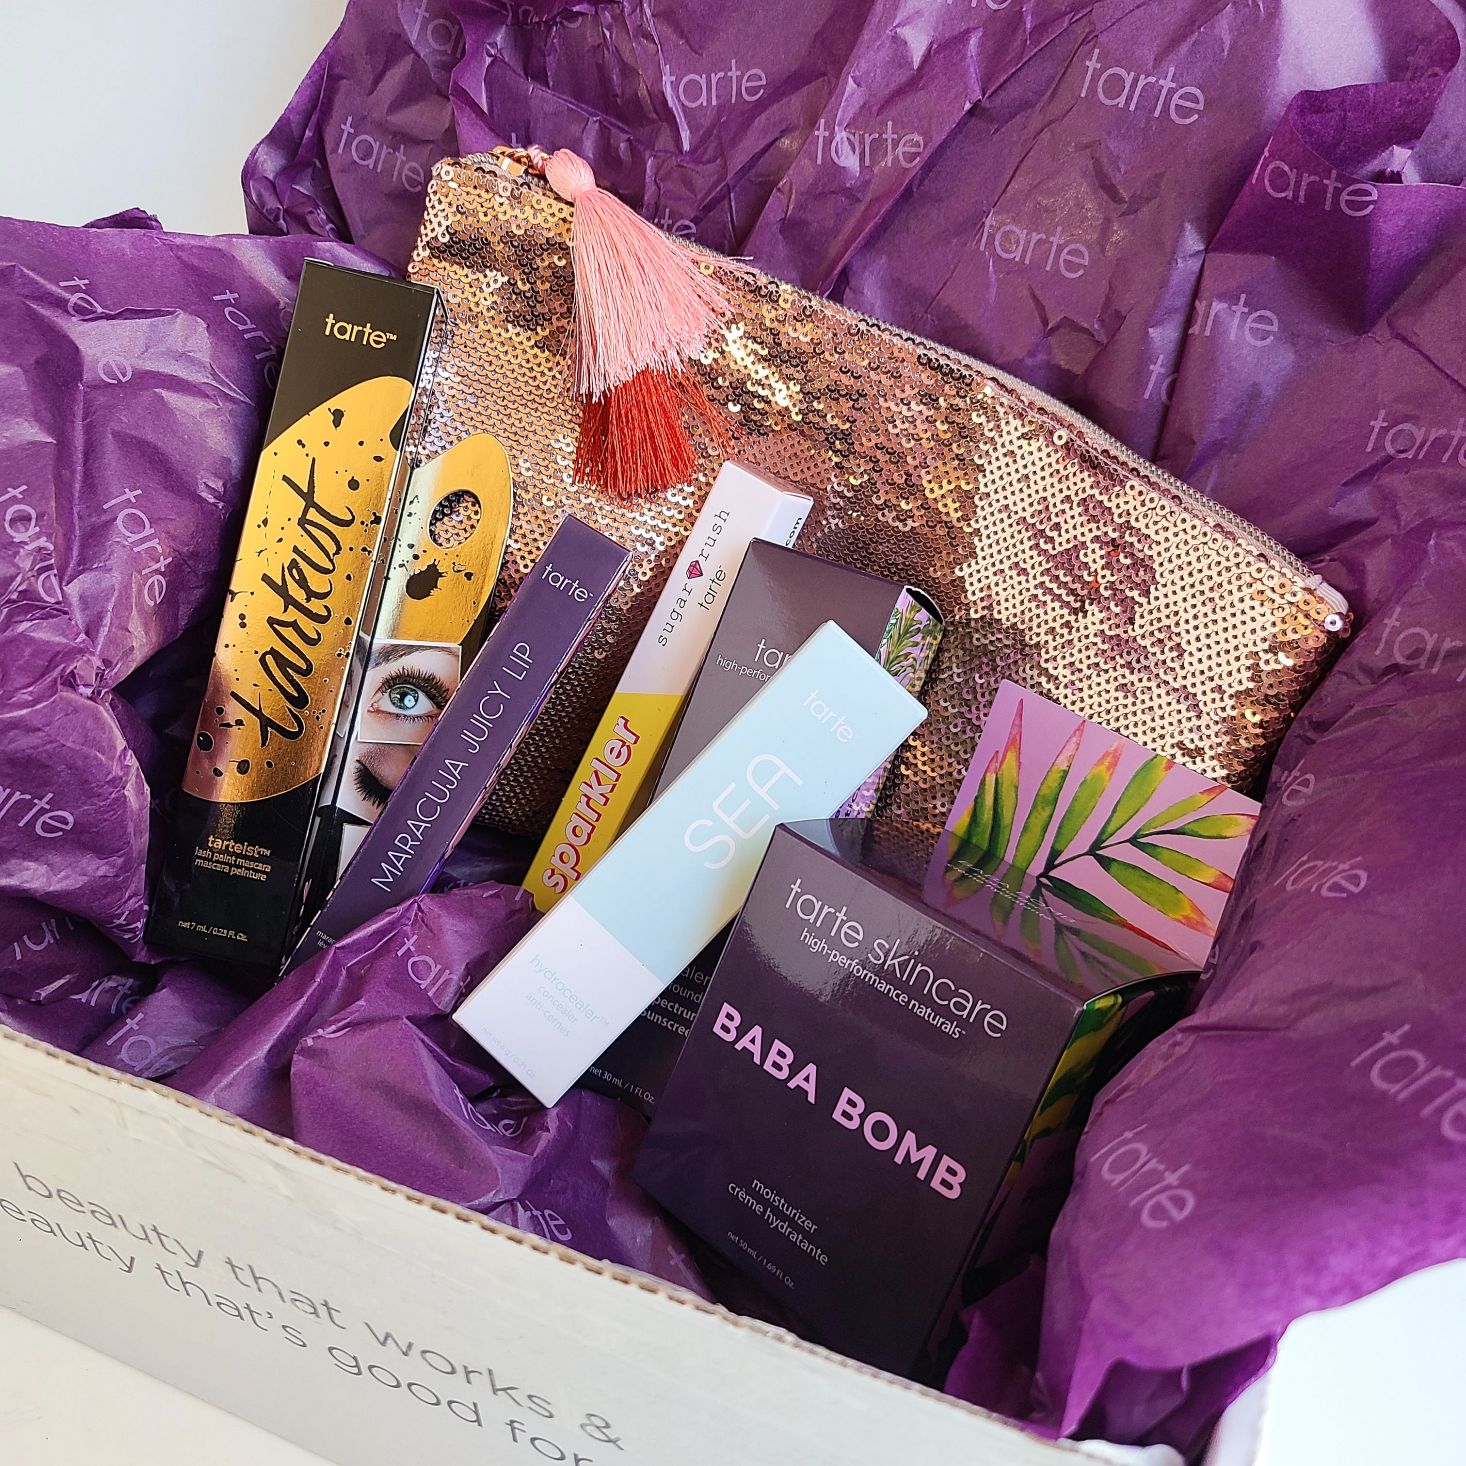 Tarte Create Your Own Beauty Kit Review - August 2020 | MSA